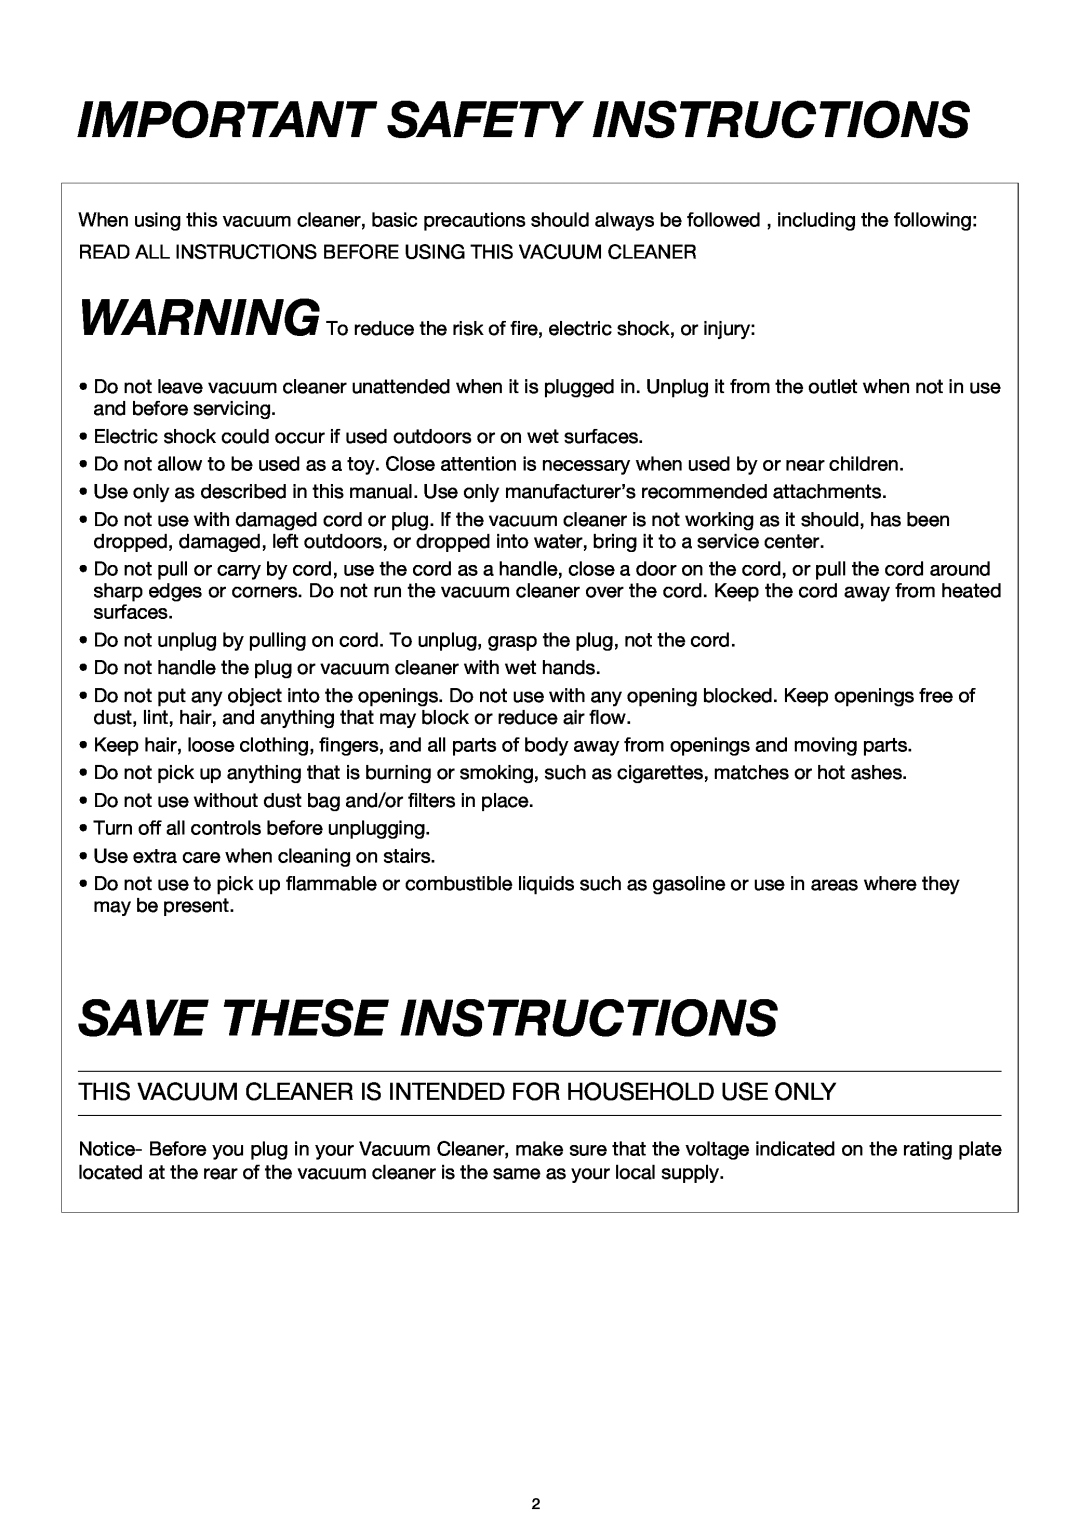 Miele S184, S183 important safety instructions Important Safety Instructions, Save These Instructions 